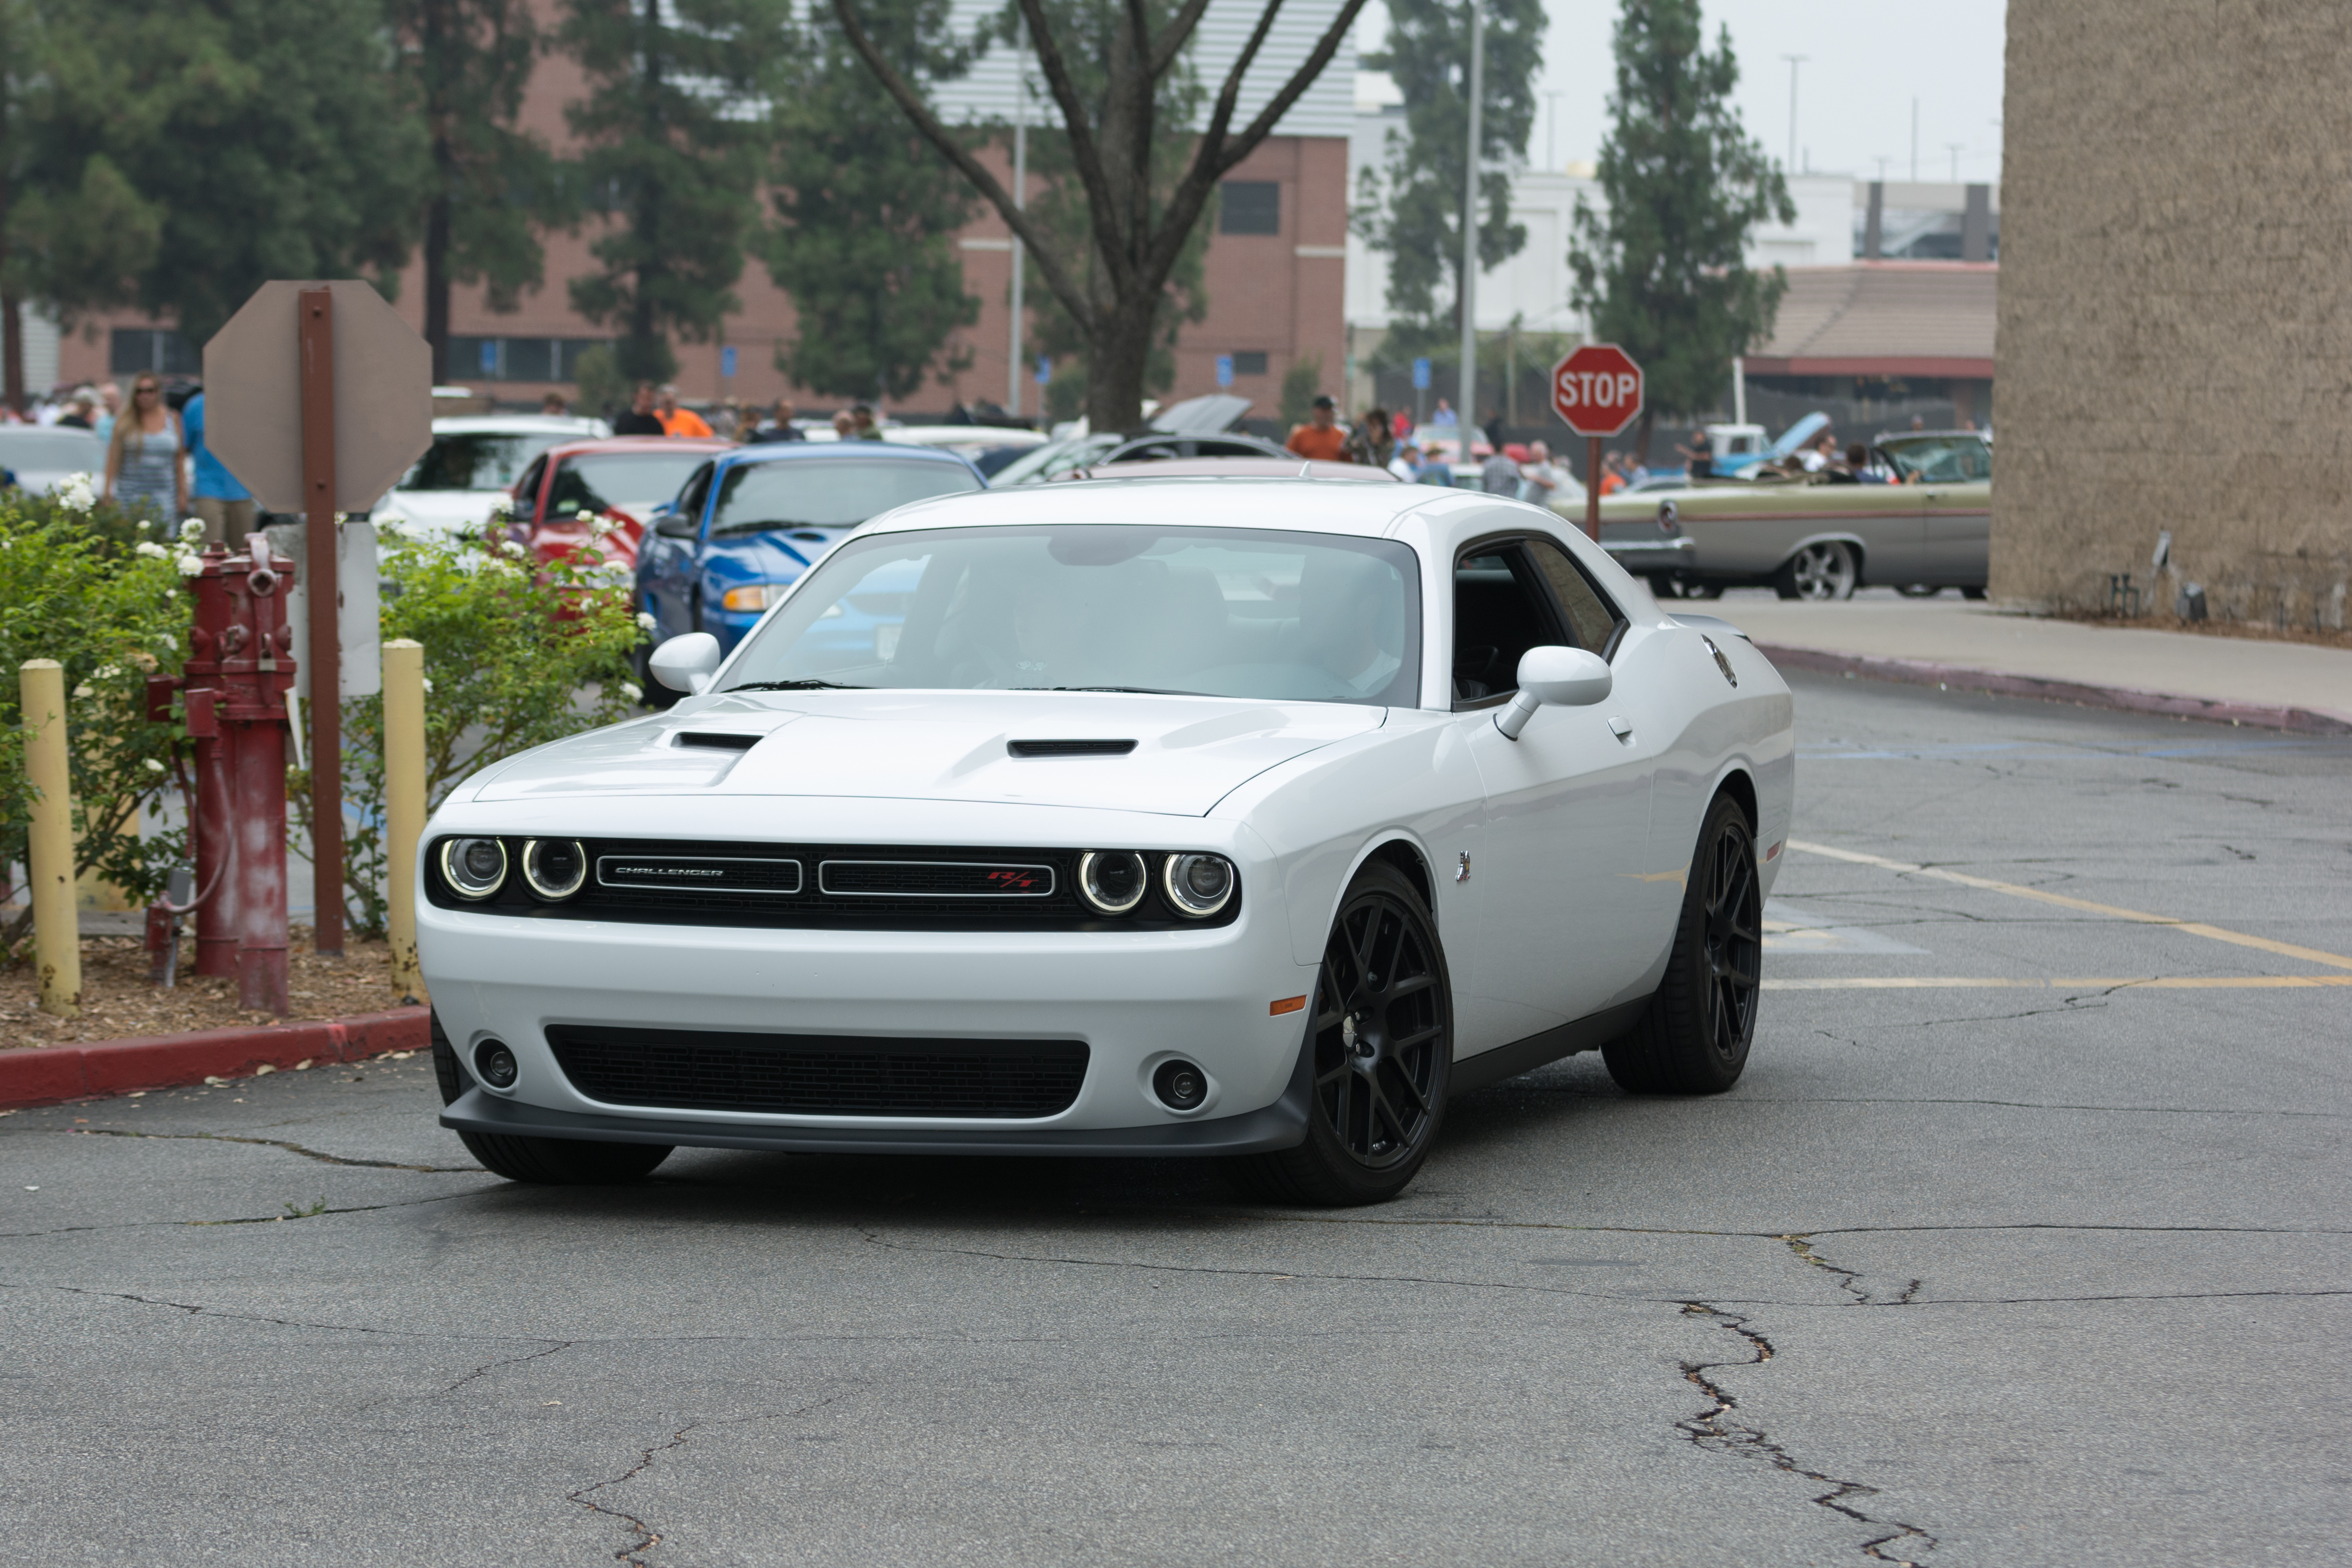 A Dodge Challenger RT car on display at the Supercar Sunday car event in Woodland Hills, California on July 5, 2015 | Source: Shutterstock